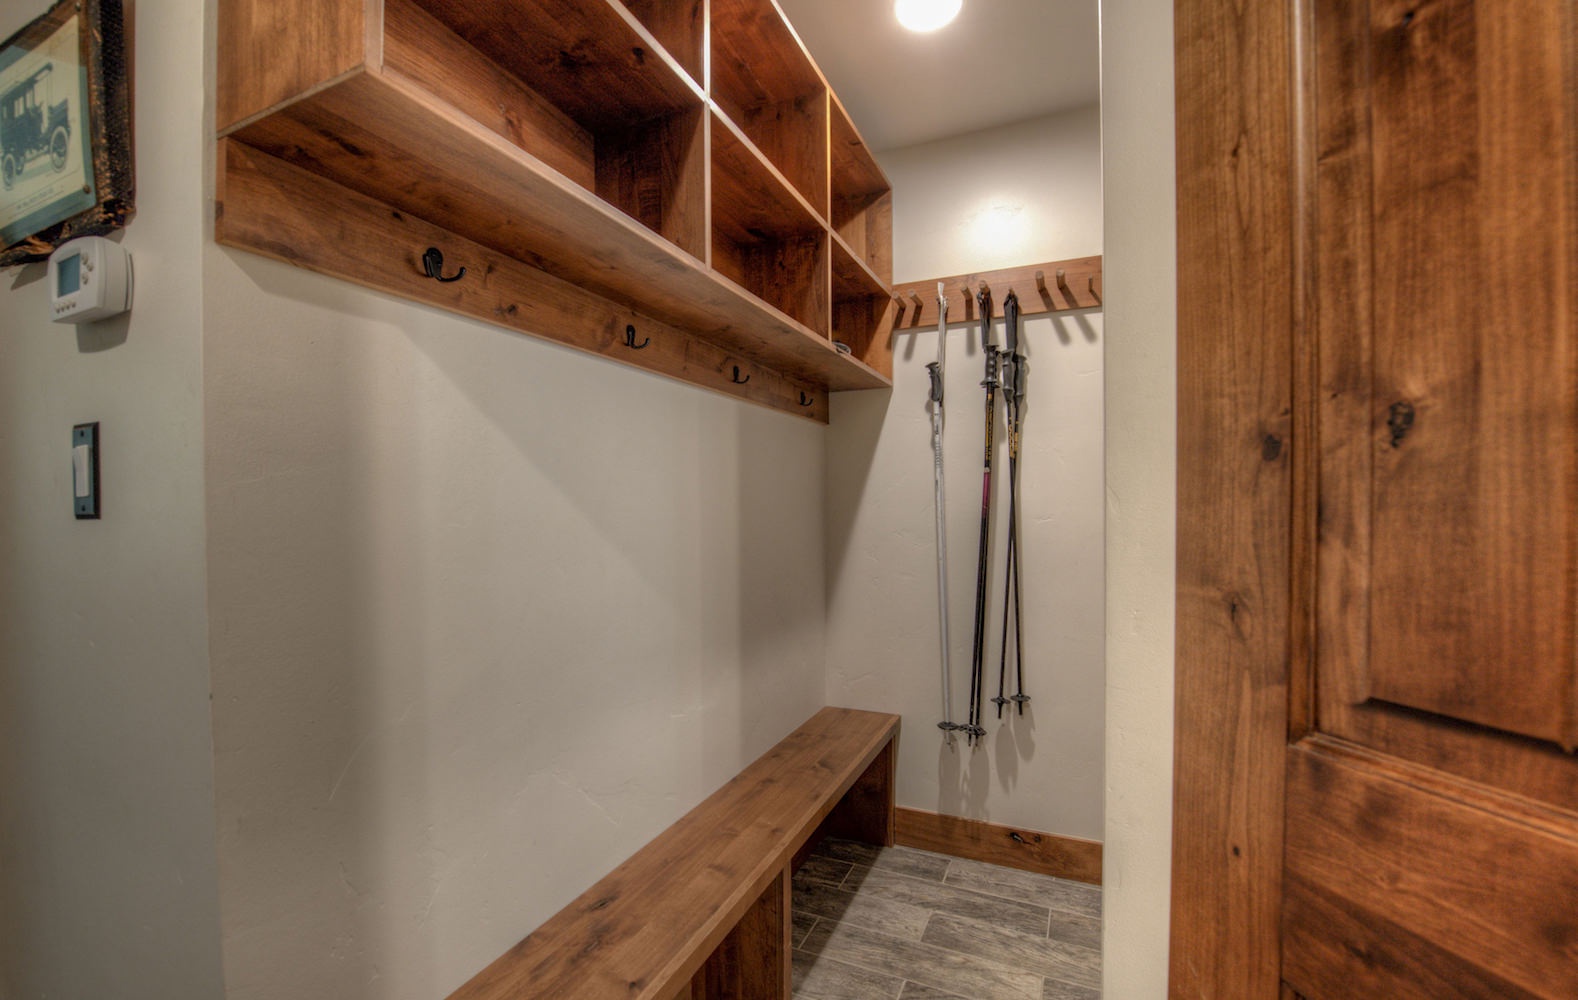 Mud room to store skis and snowboards